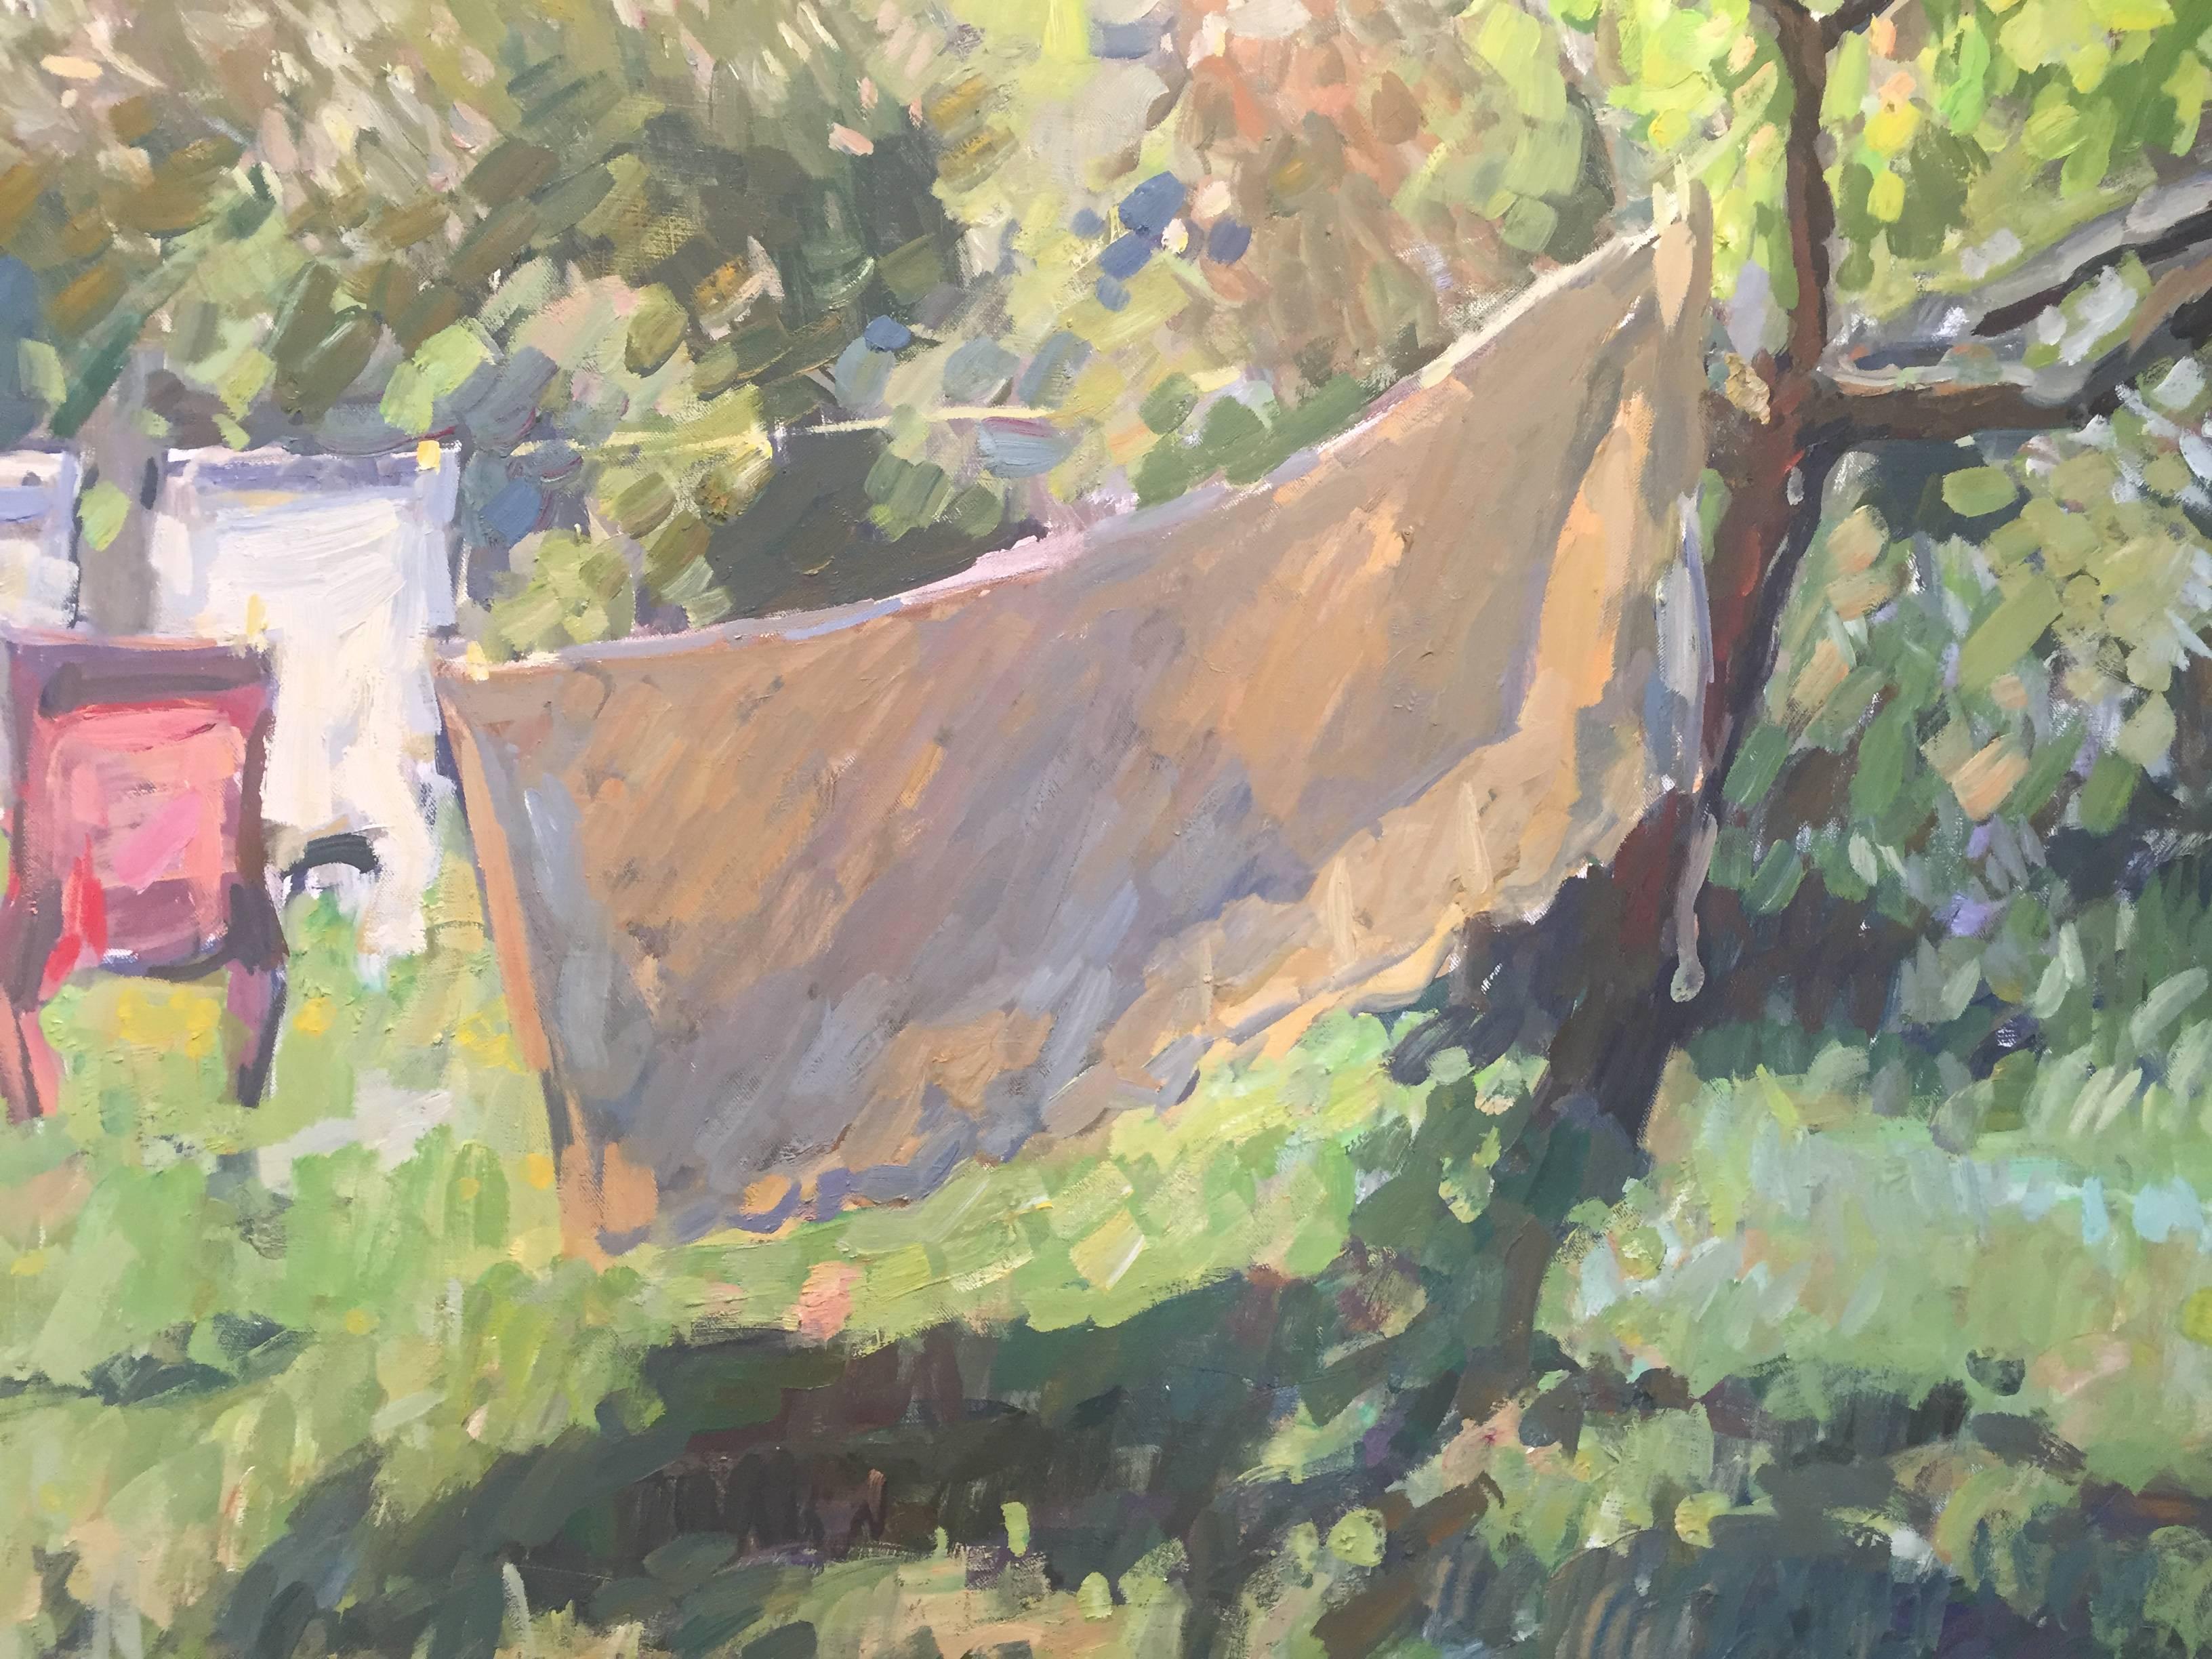 Painted en plein air at his farmhouse in Chianti, italy, Fenske delivers vibrance and movement with 